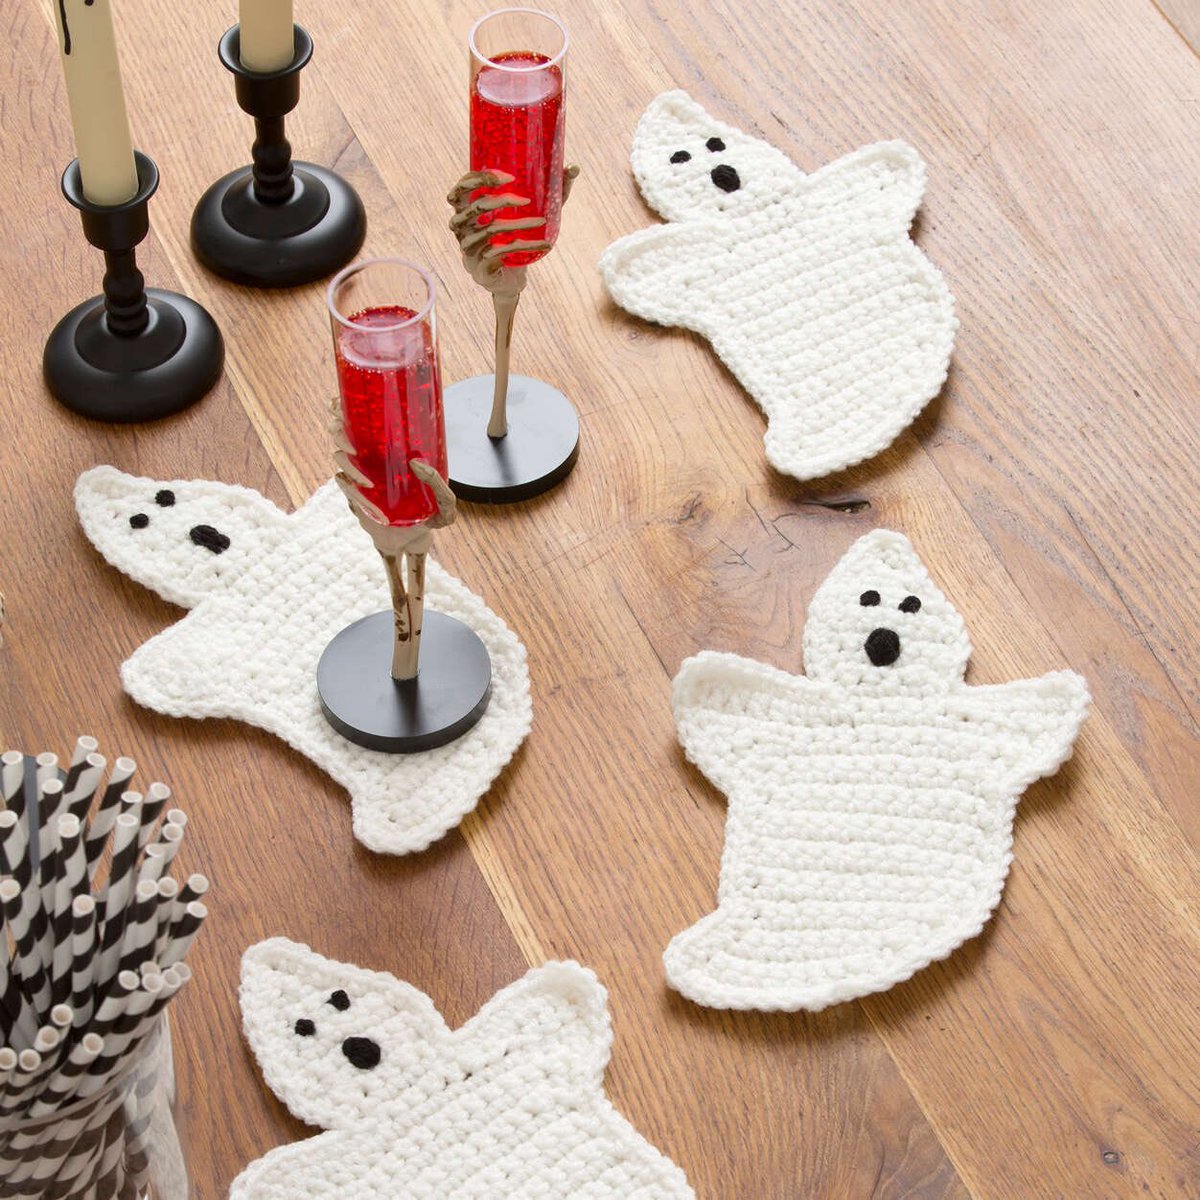 My crochet lesson went well. I’m prepping for Halloween! I’m making these coasters, but instead making them a garland to decorate the house with. Like this from Yarnspirations. 

Source: yarnspirations.com/red-heart-croc…